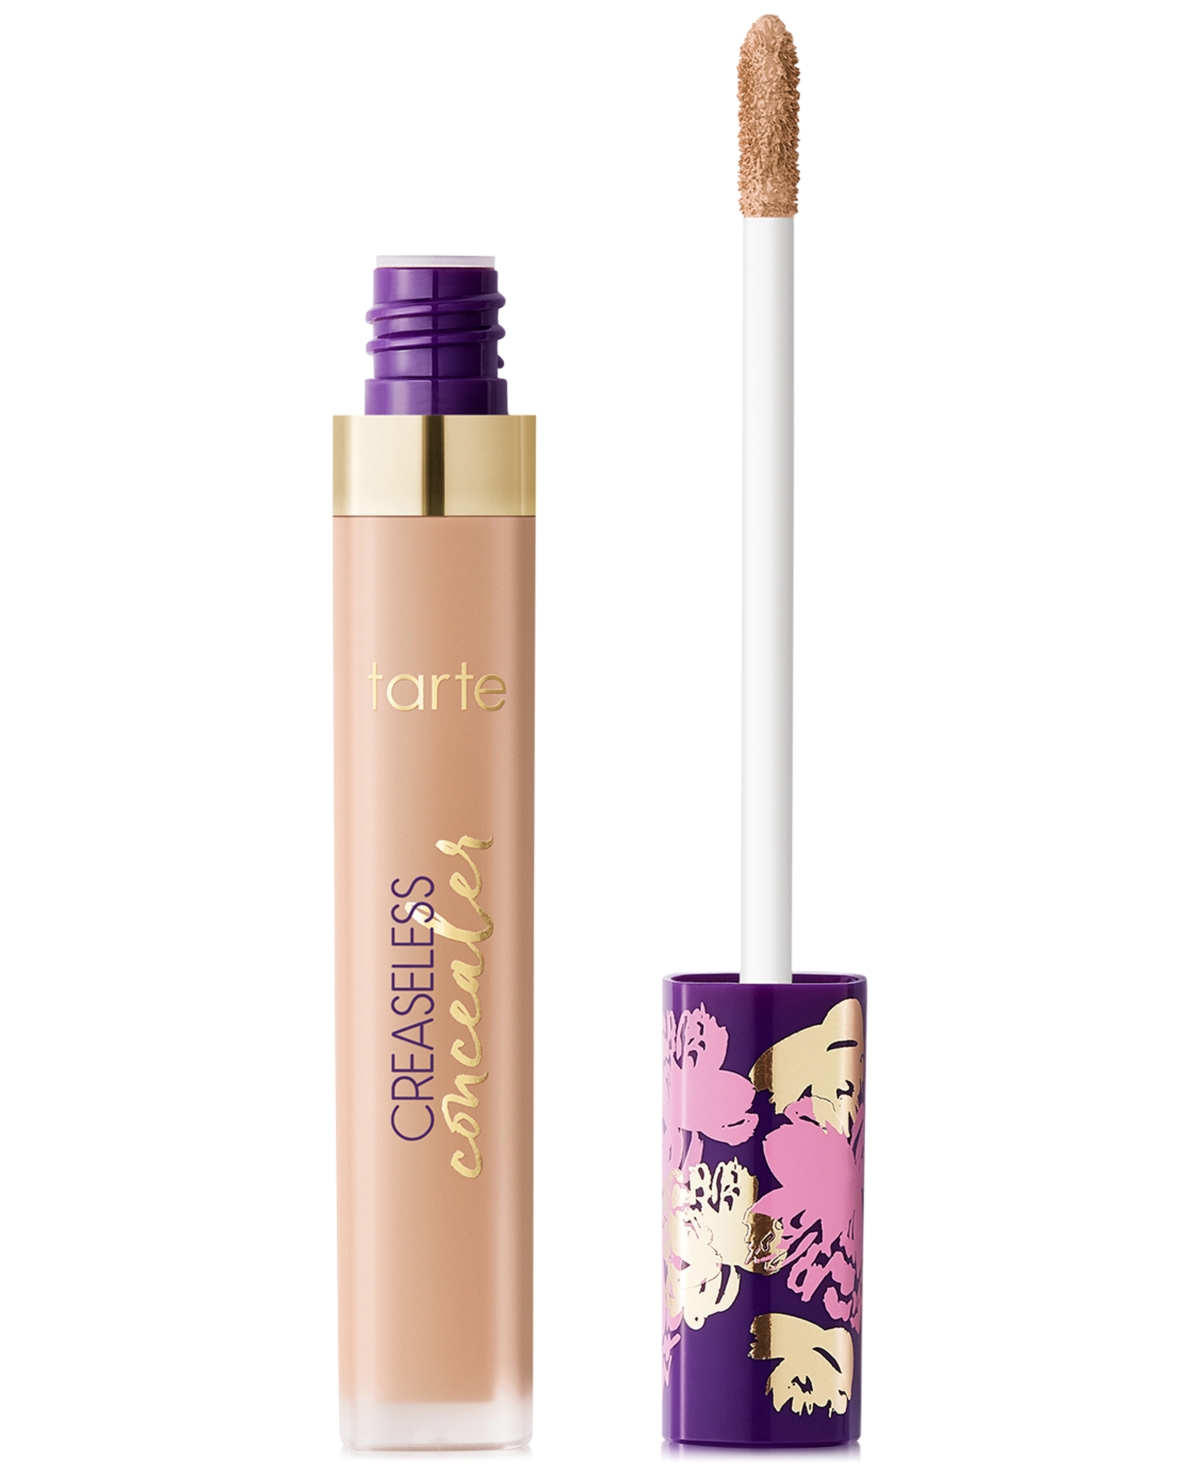 Tarte Creaseless Concealer In Smediumsand - Med Skin With Warm,golden